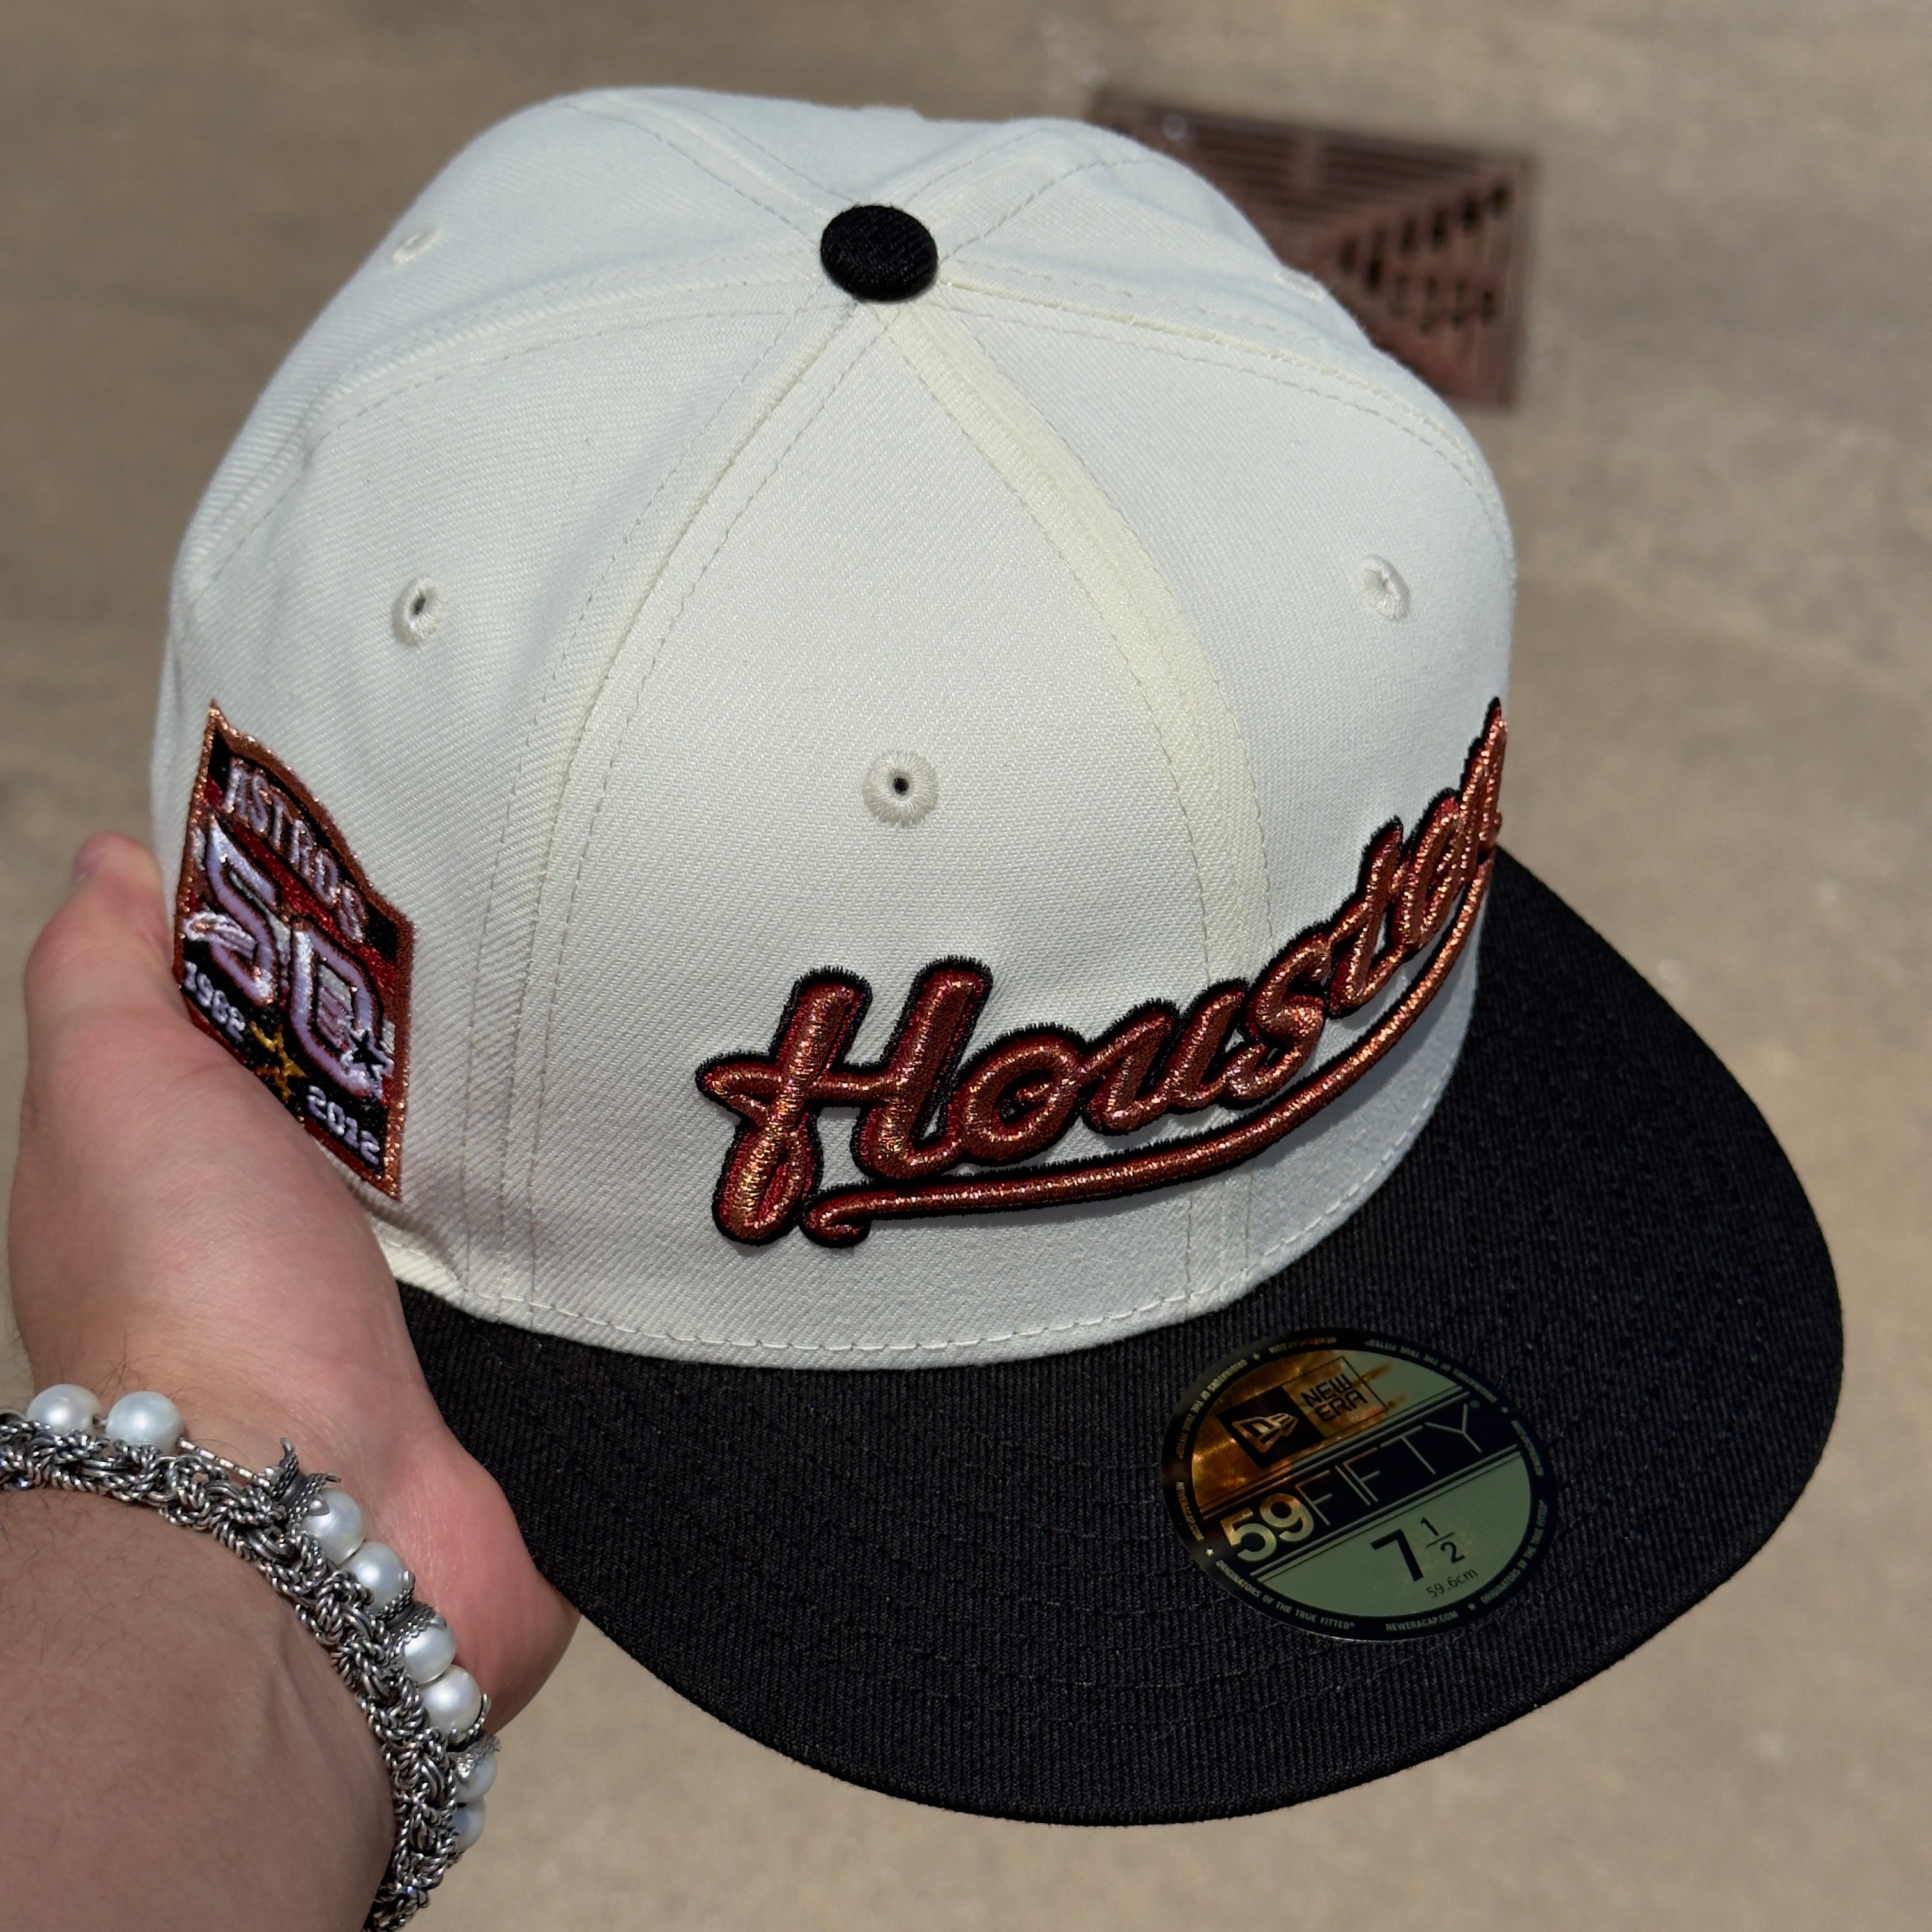 1/2 NEW Chrome Houston Astros 50 Years Copper  59fifty New Era Fitted Hat Cap